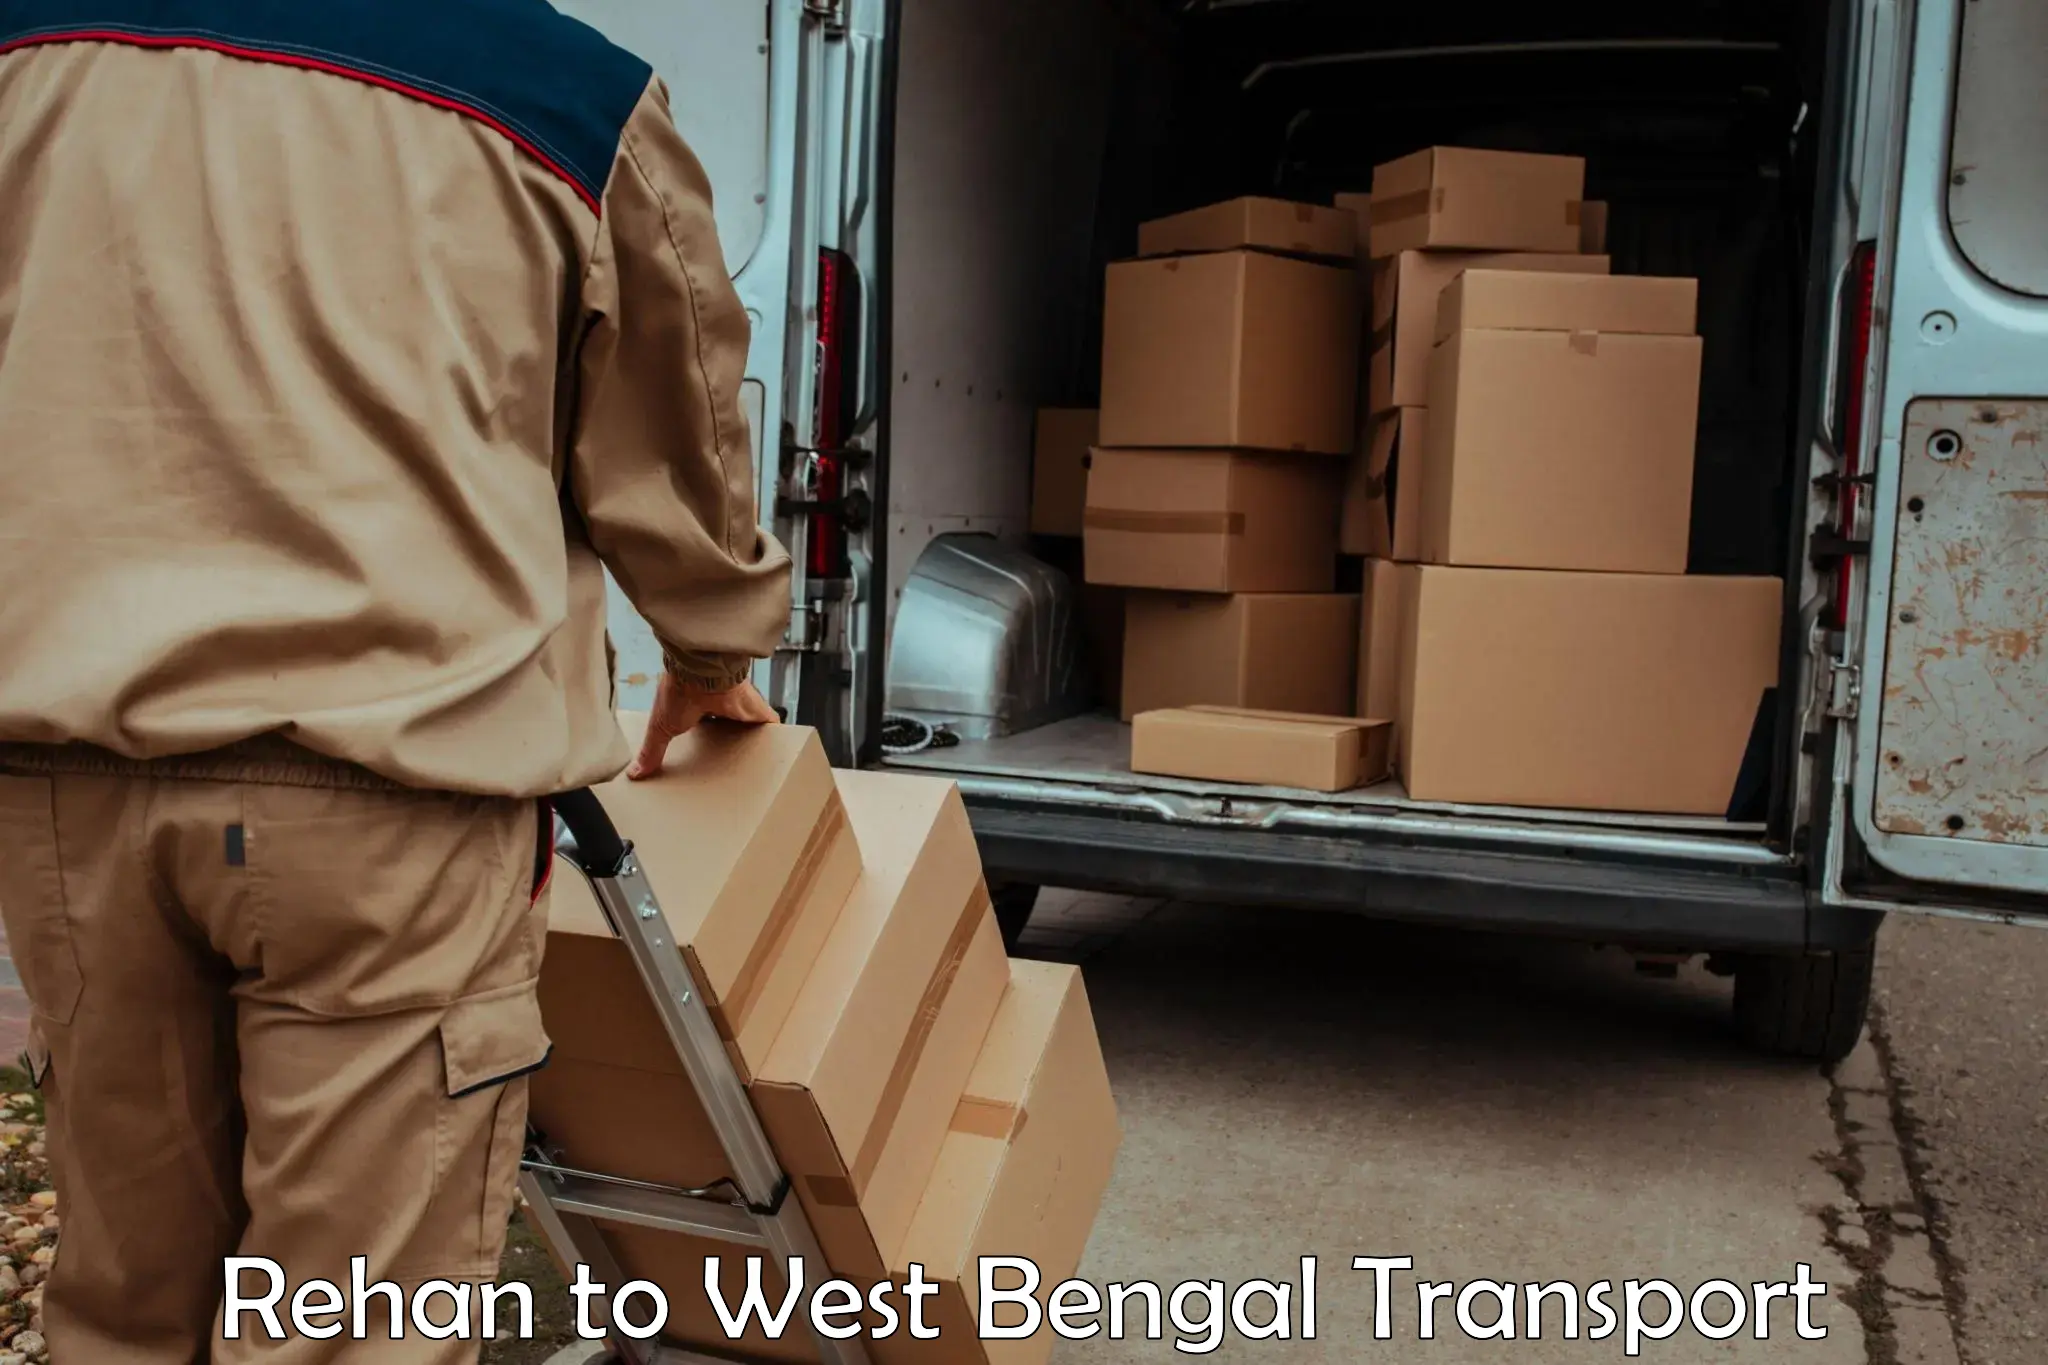 Pick up transport service Rehan to West Bengal